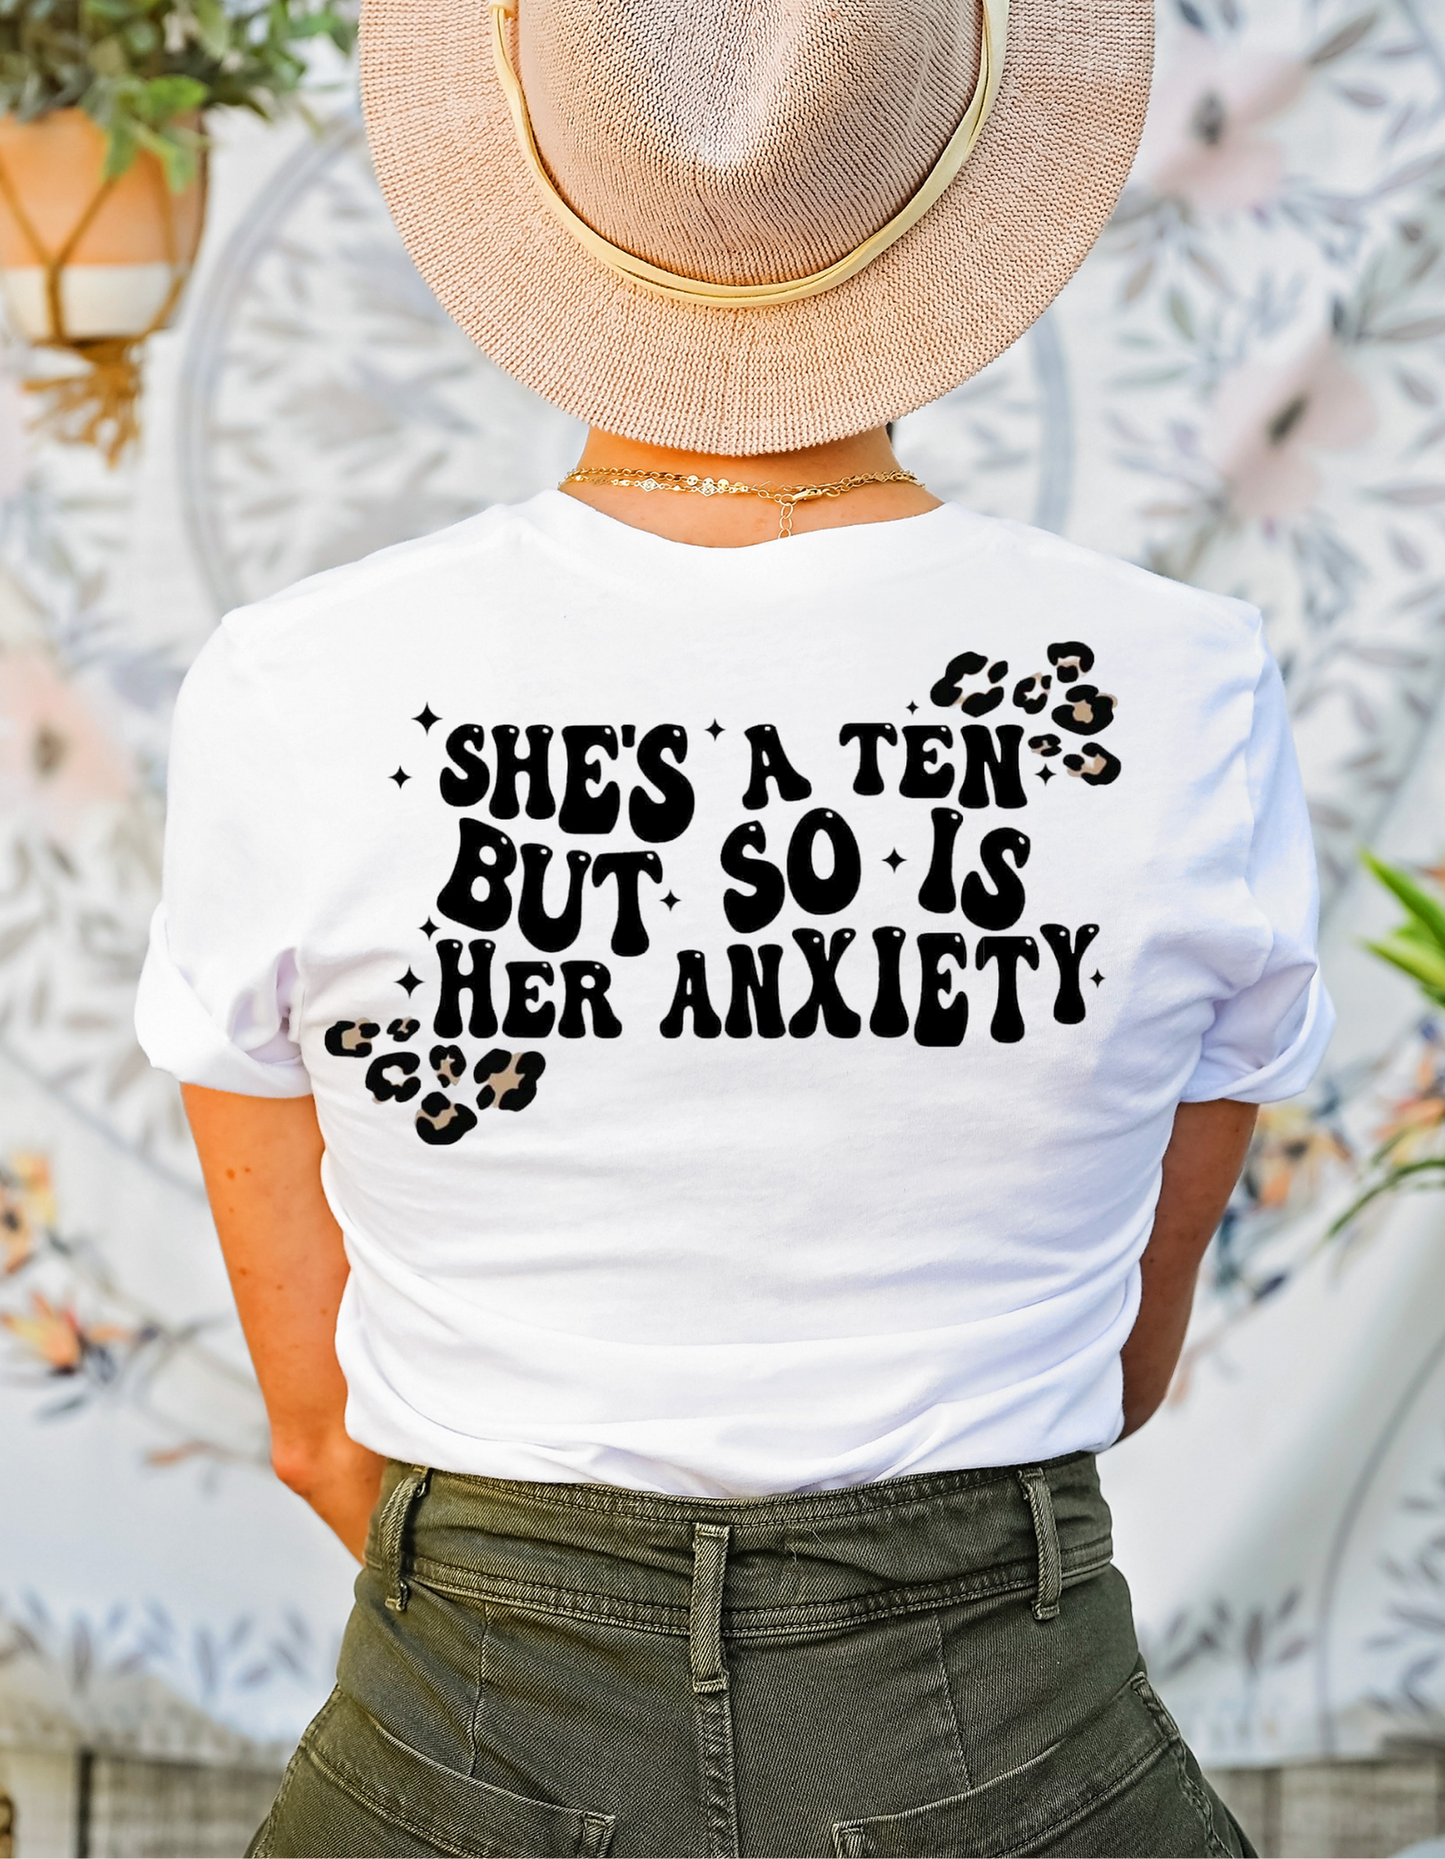 She’s a 10 but so is her anxiety shirt.